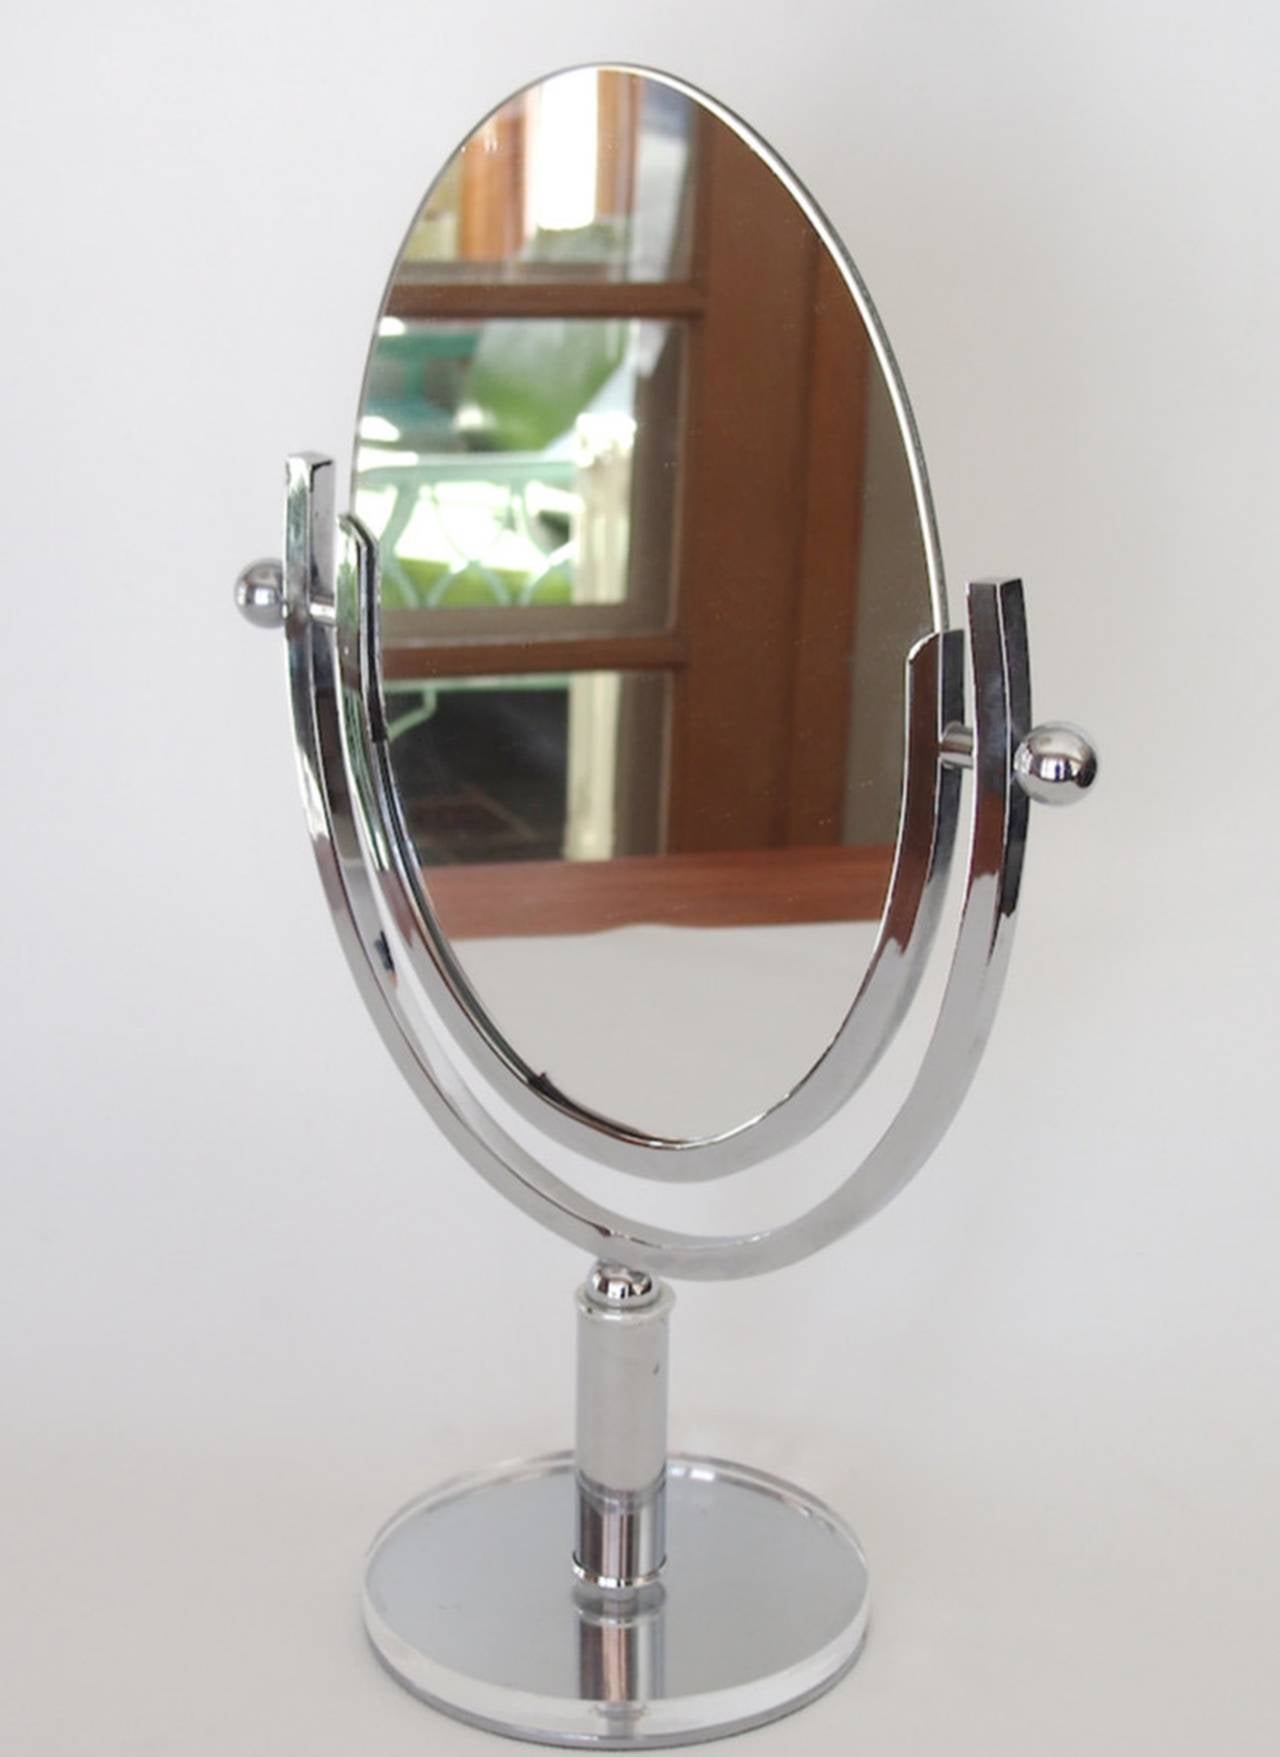 Fantastic vanity mirror in Lucite and nickel designed and manufactured by Charles Hollis Jones in the 1970s.
The mirror is in excellent condition, the Lucite and metal are in good vintage condition, the mirror is oval shape and it can lean forward